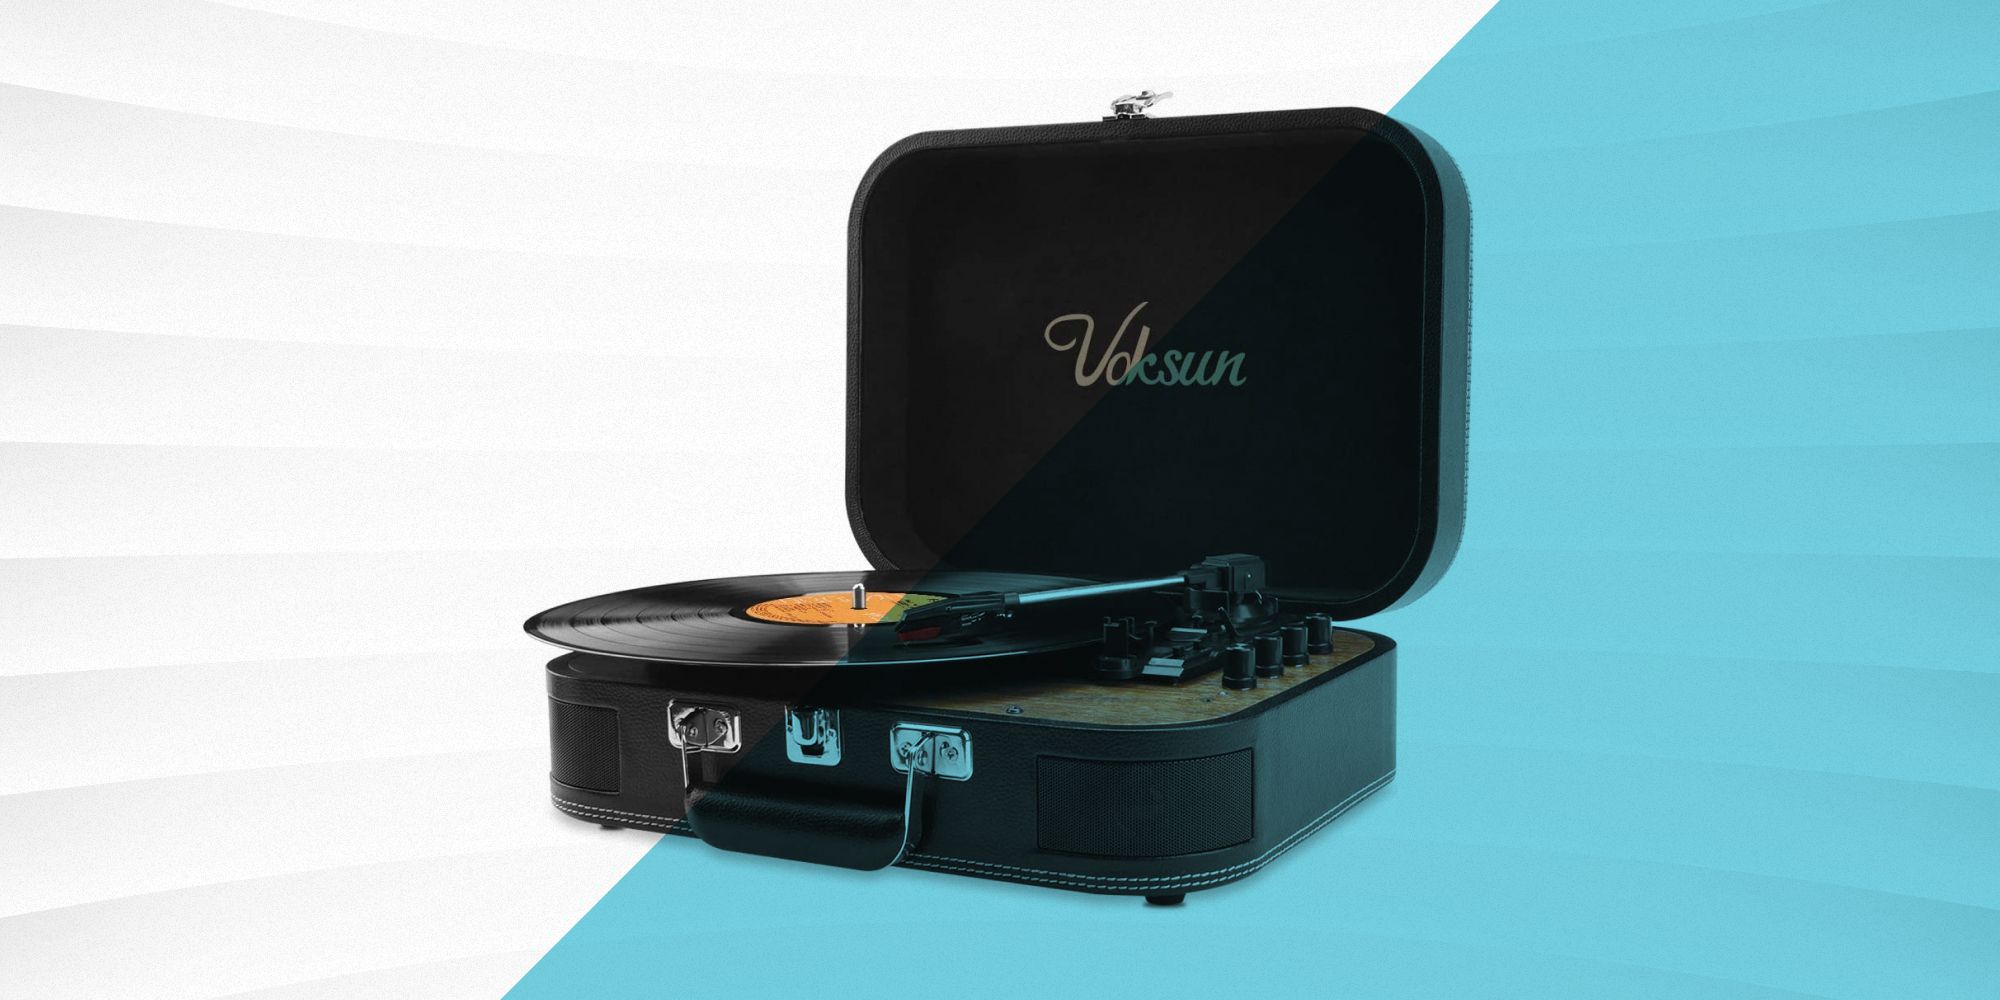 Årligt Dårlig faktor let at håndtere The 9 Best Record Players in 2022 — Cheap Record Players